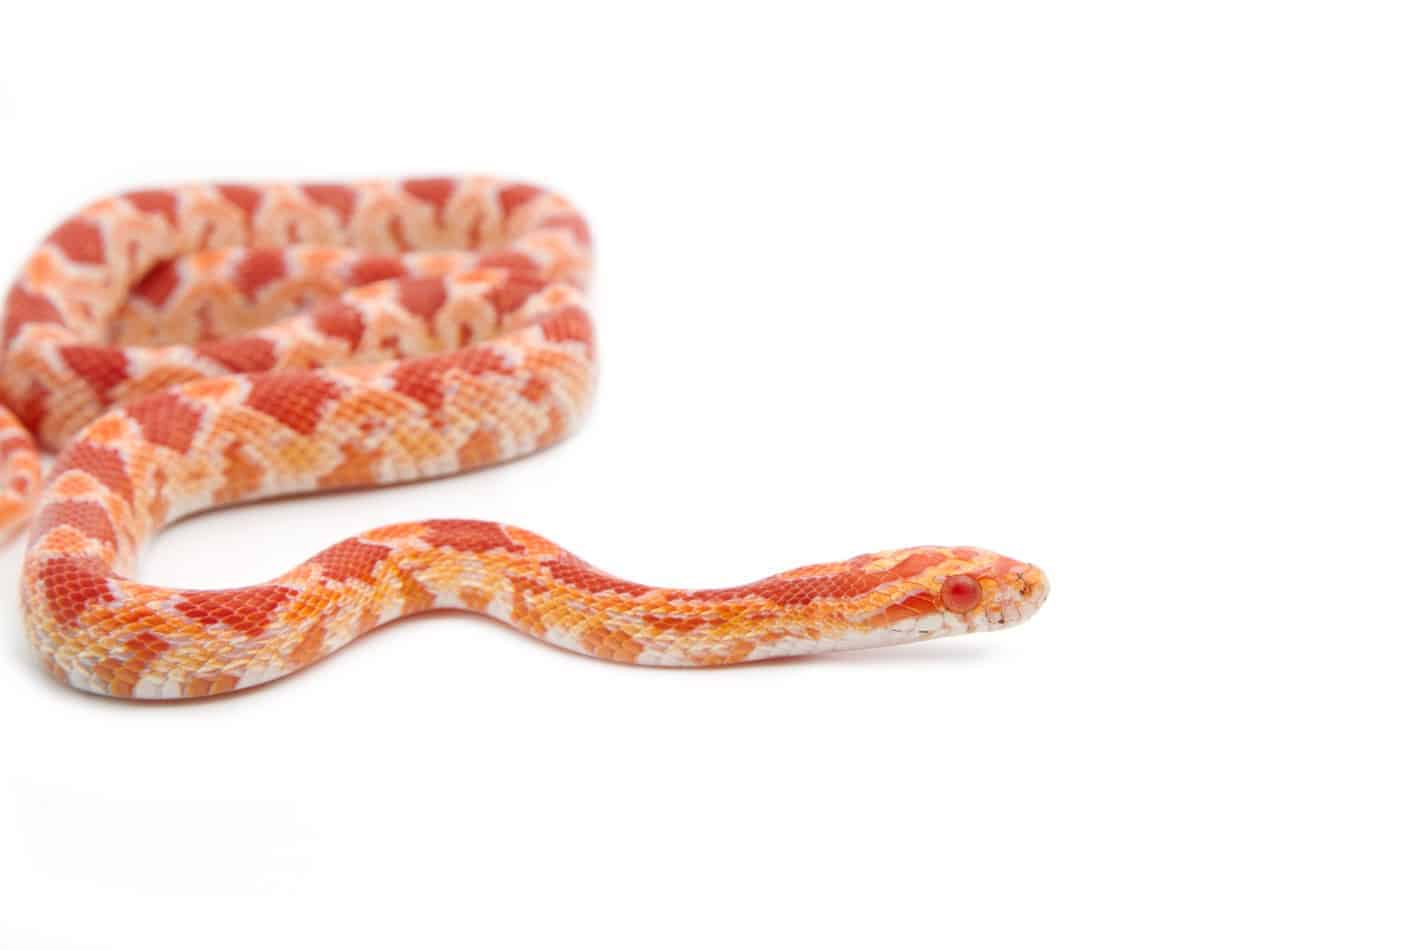 albino corn snakes a guide 2 Albino Corn Snakes: A Guide with Pictures and Facts